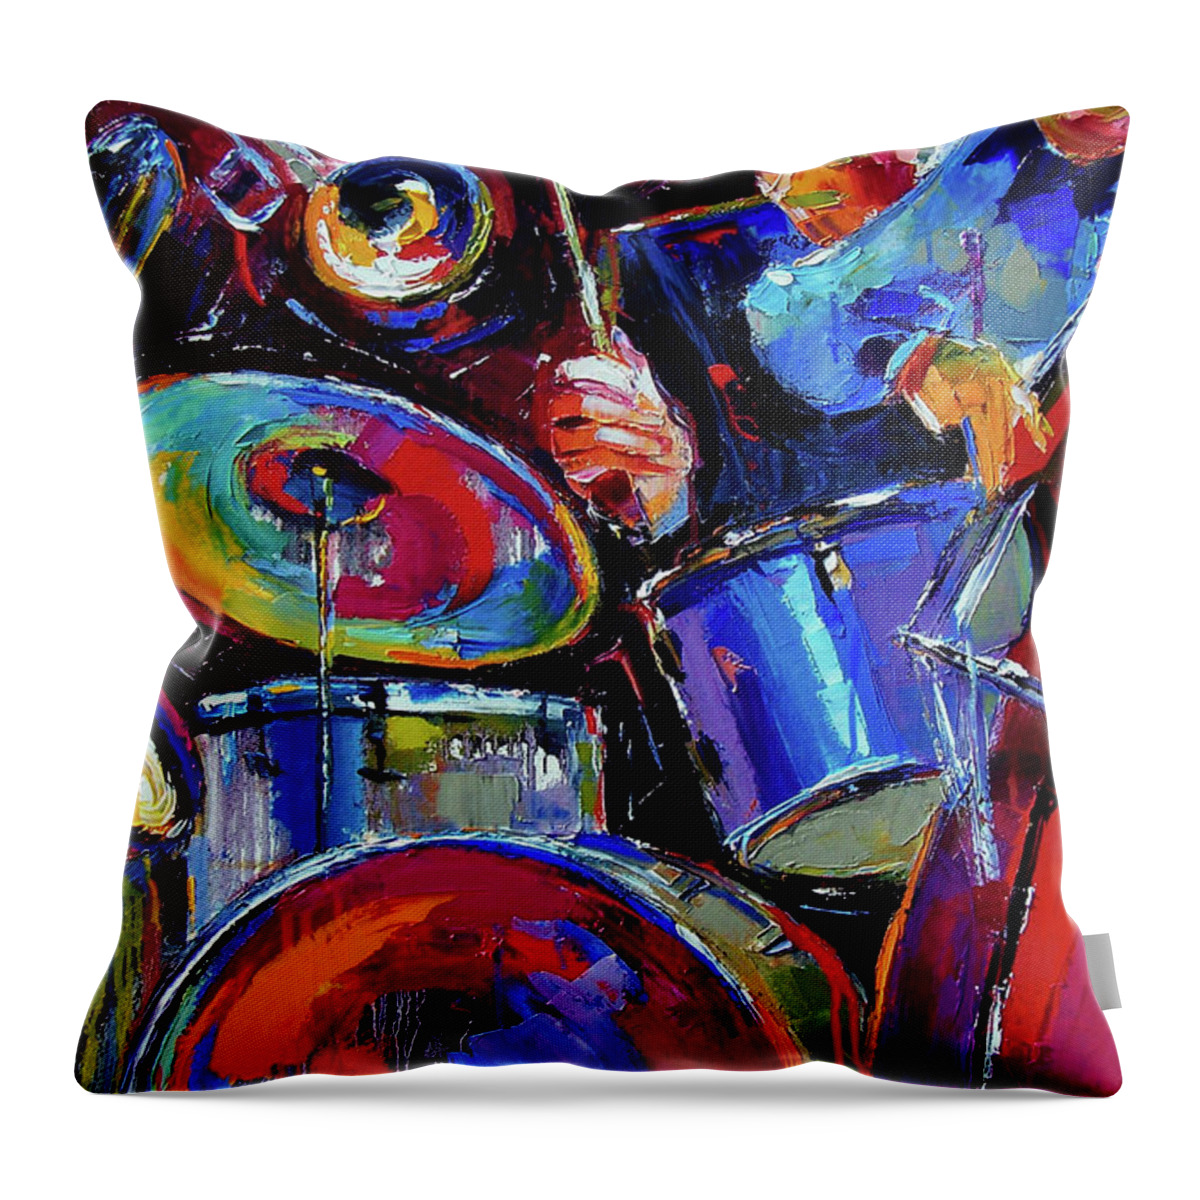 Jazz Throw Pillow featuring the painting Drums And Friends by Debra Hurd